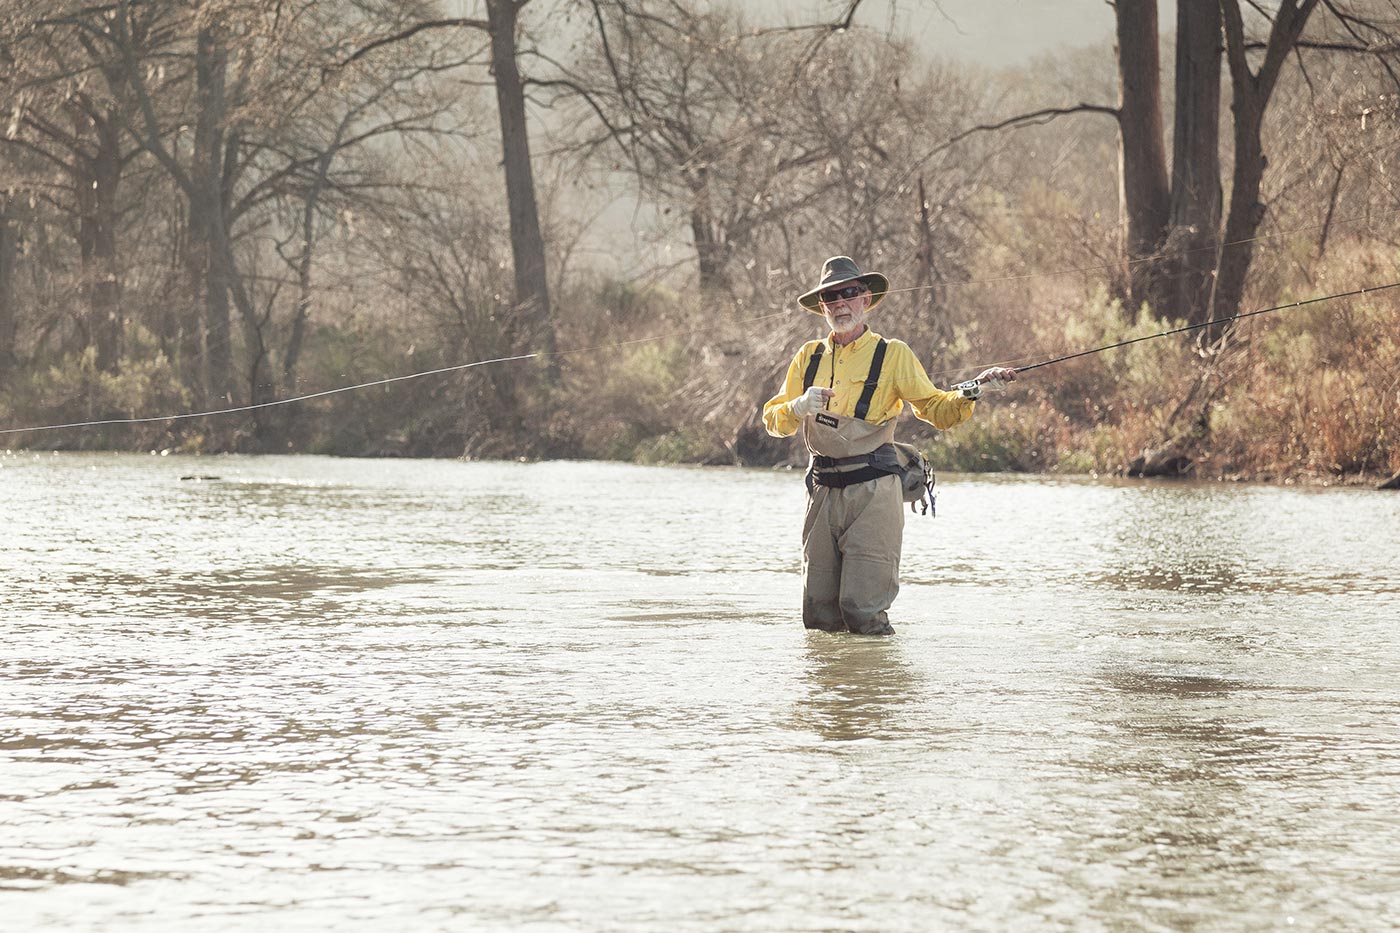 Adventure-ABP-Fly-Fishing-Guadalupe-River.jpg